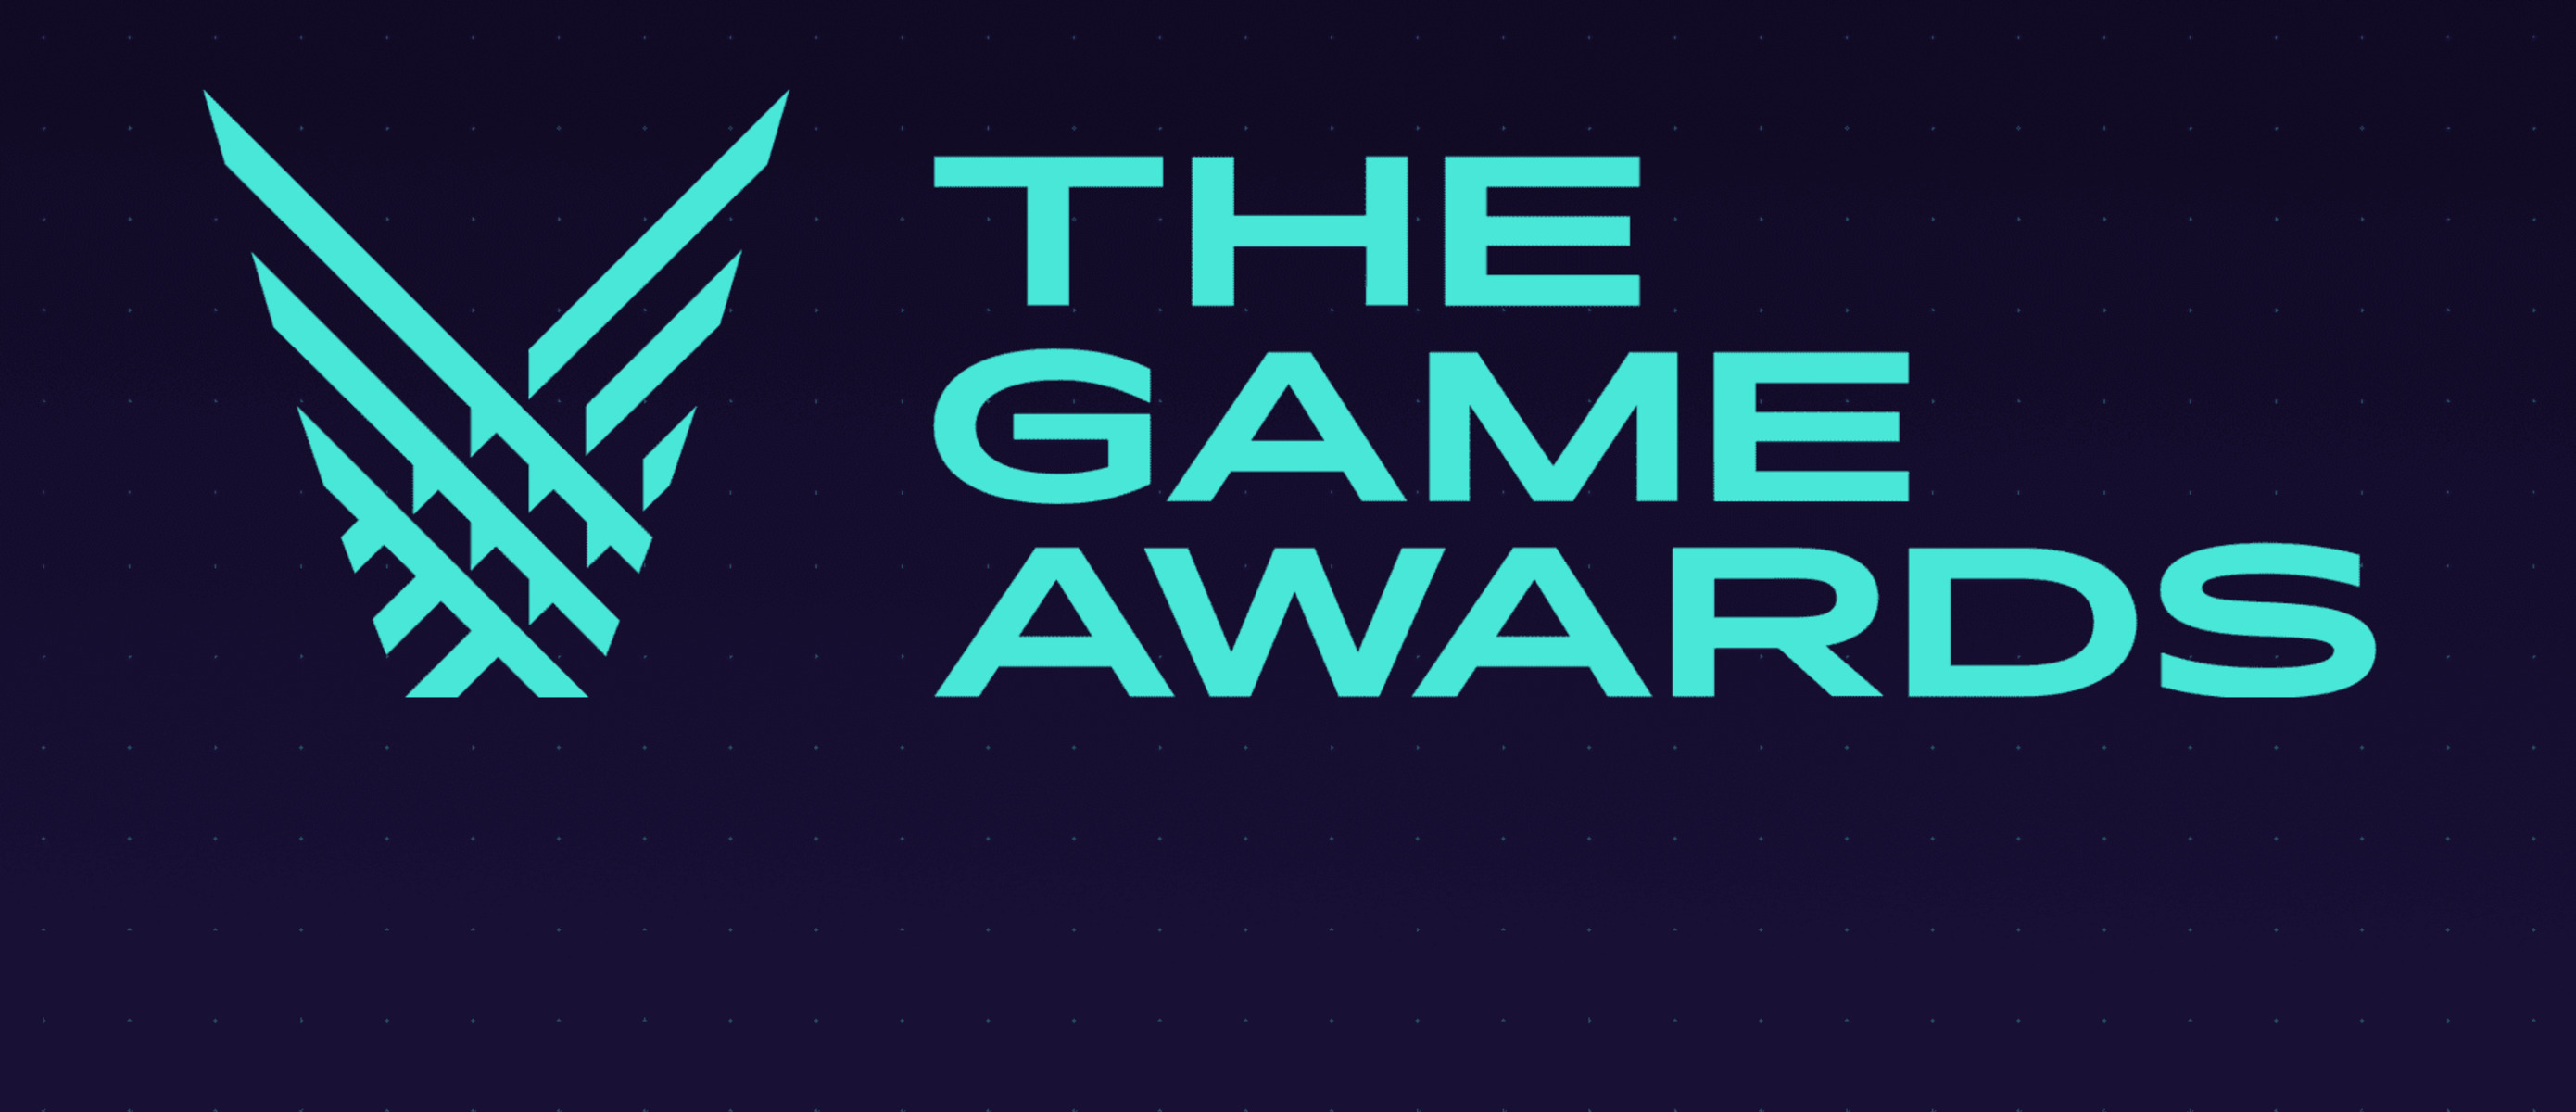 Game s starting. Лого the game Awards. The game Awards. The game Awards 2021. The game Awards 2022.